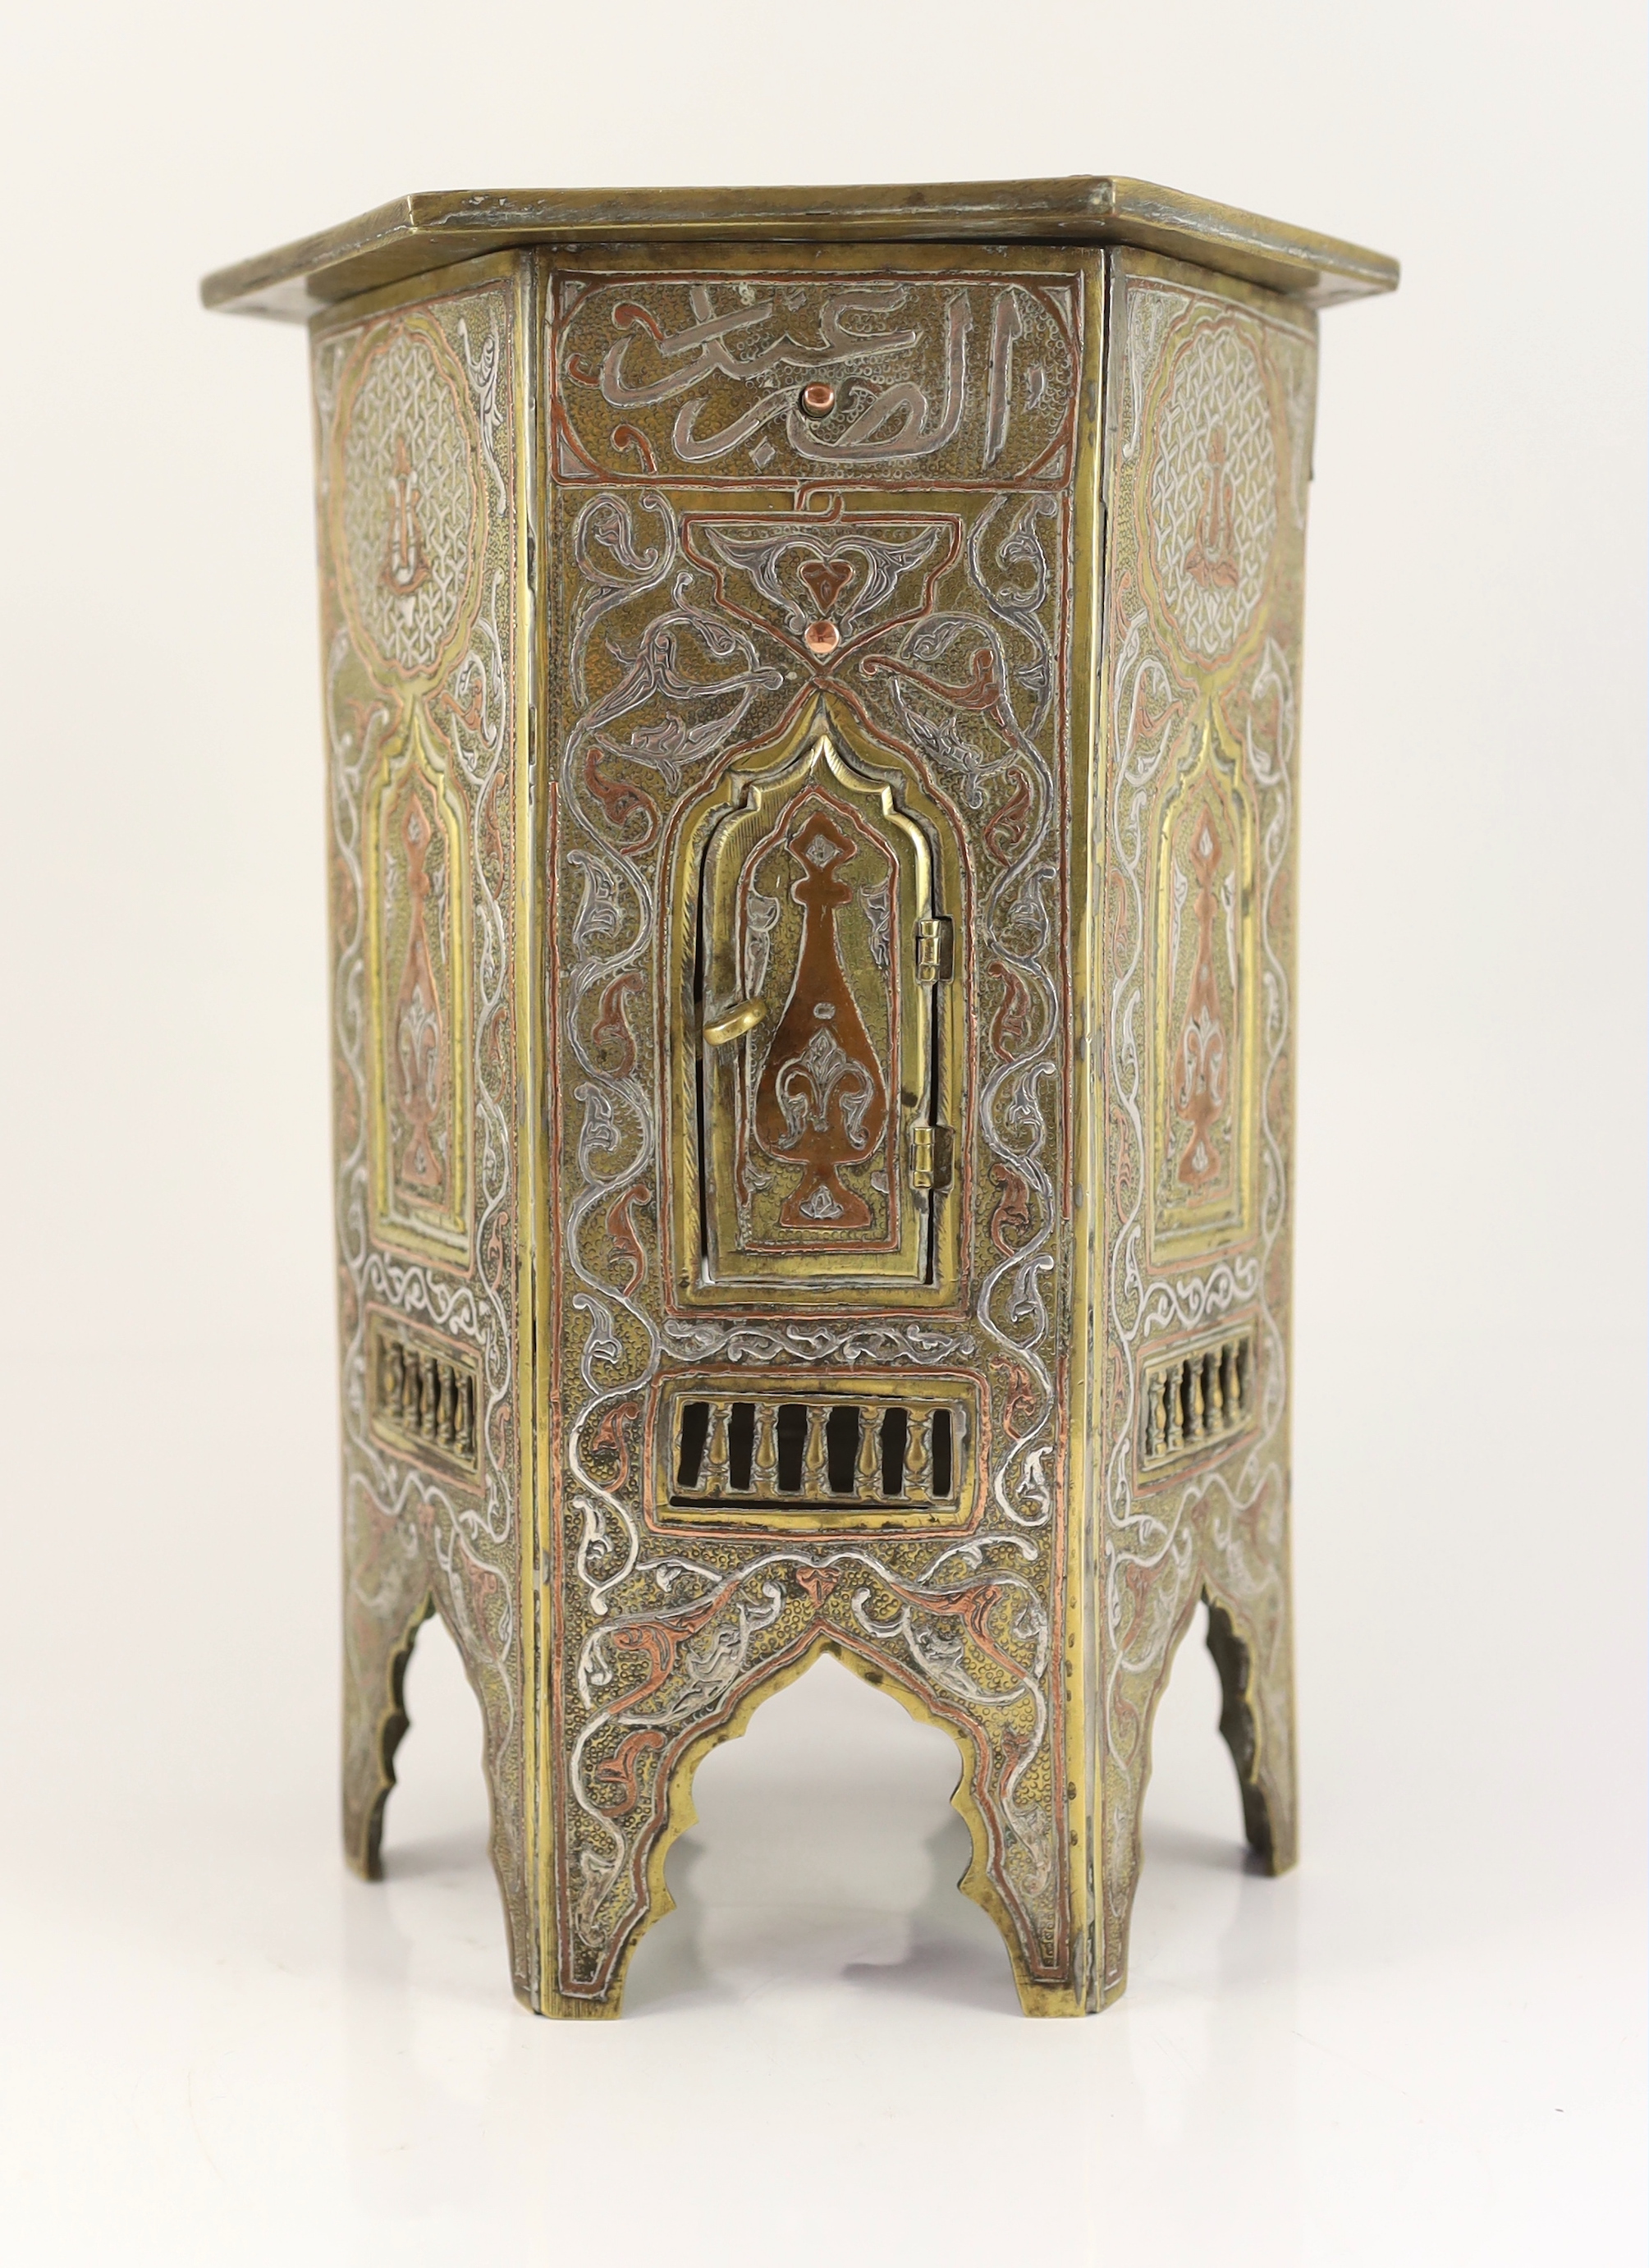 A Cairo ware silver and copper inlaid brass Qur’an stand, early 20th century